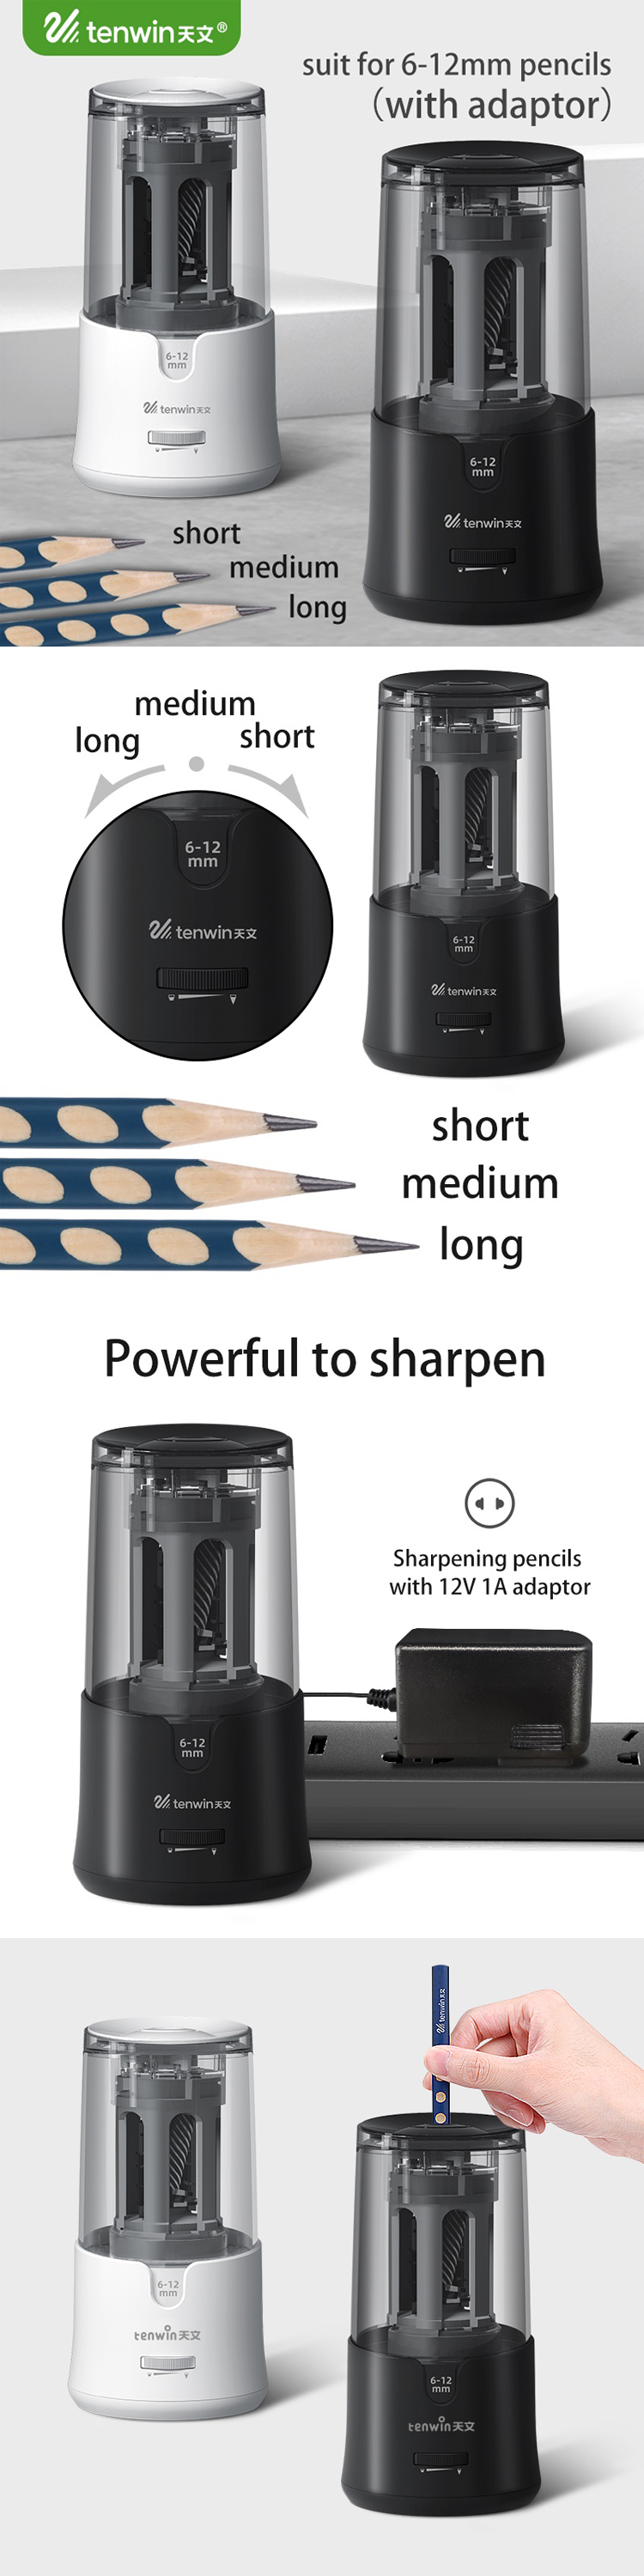 Tenwin High Quality Heavy-Duty Easy To Operate Apply To 6-12mm Electric Pencil Sharpener